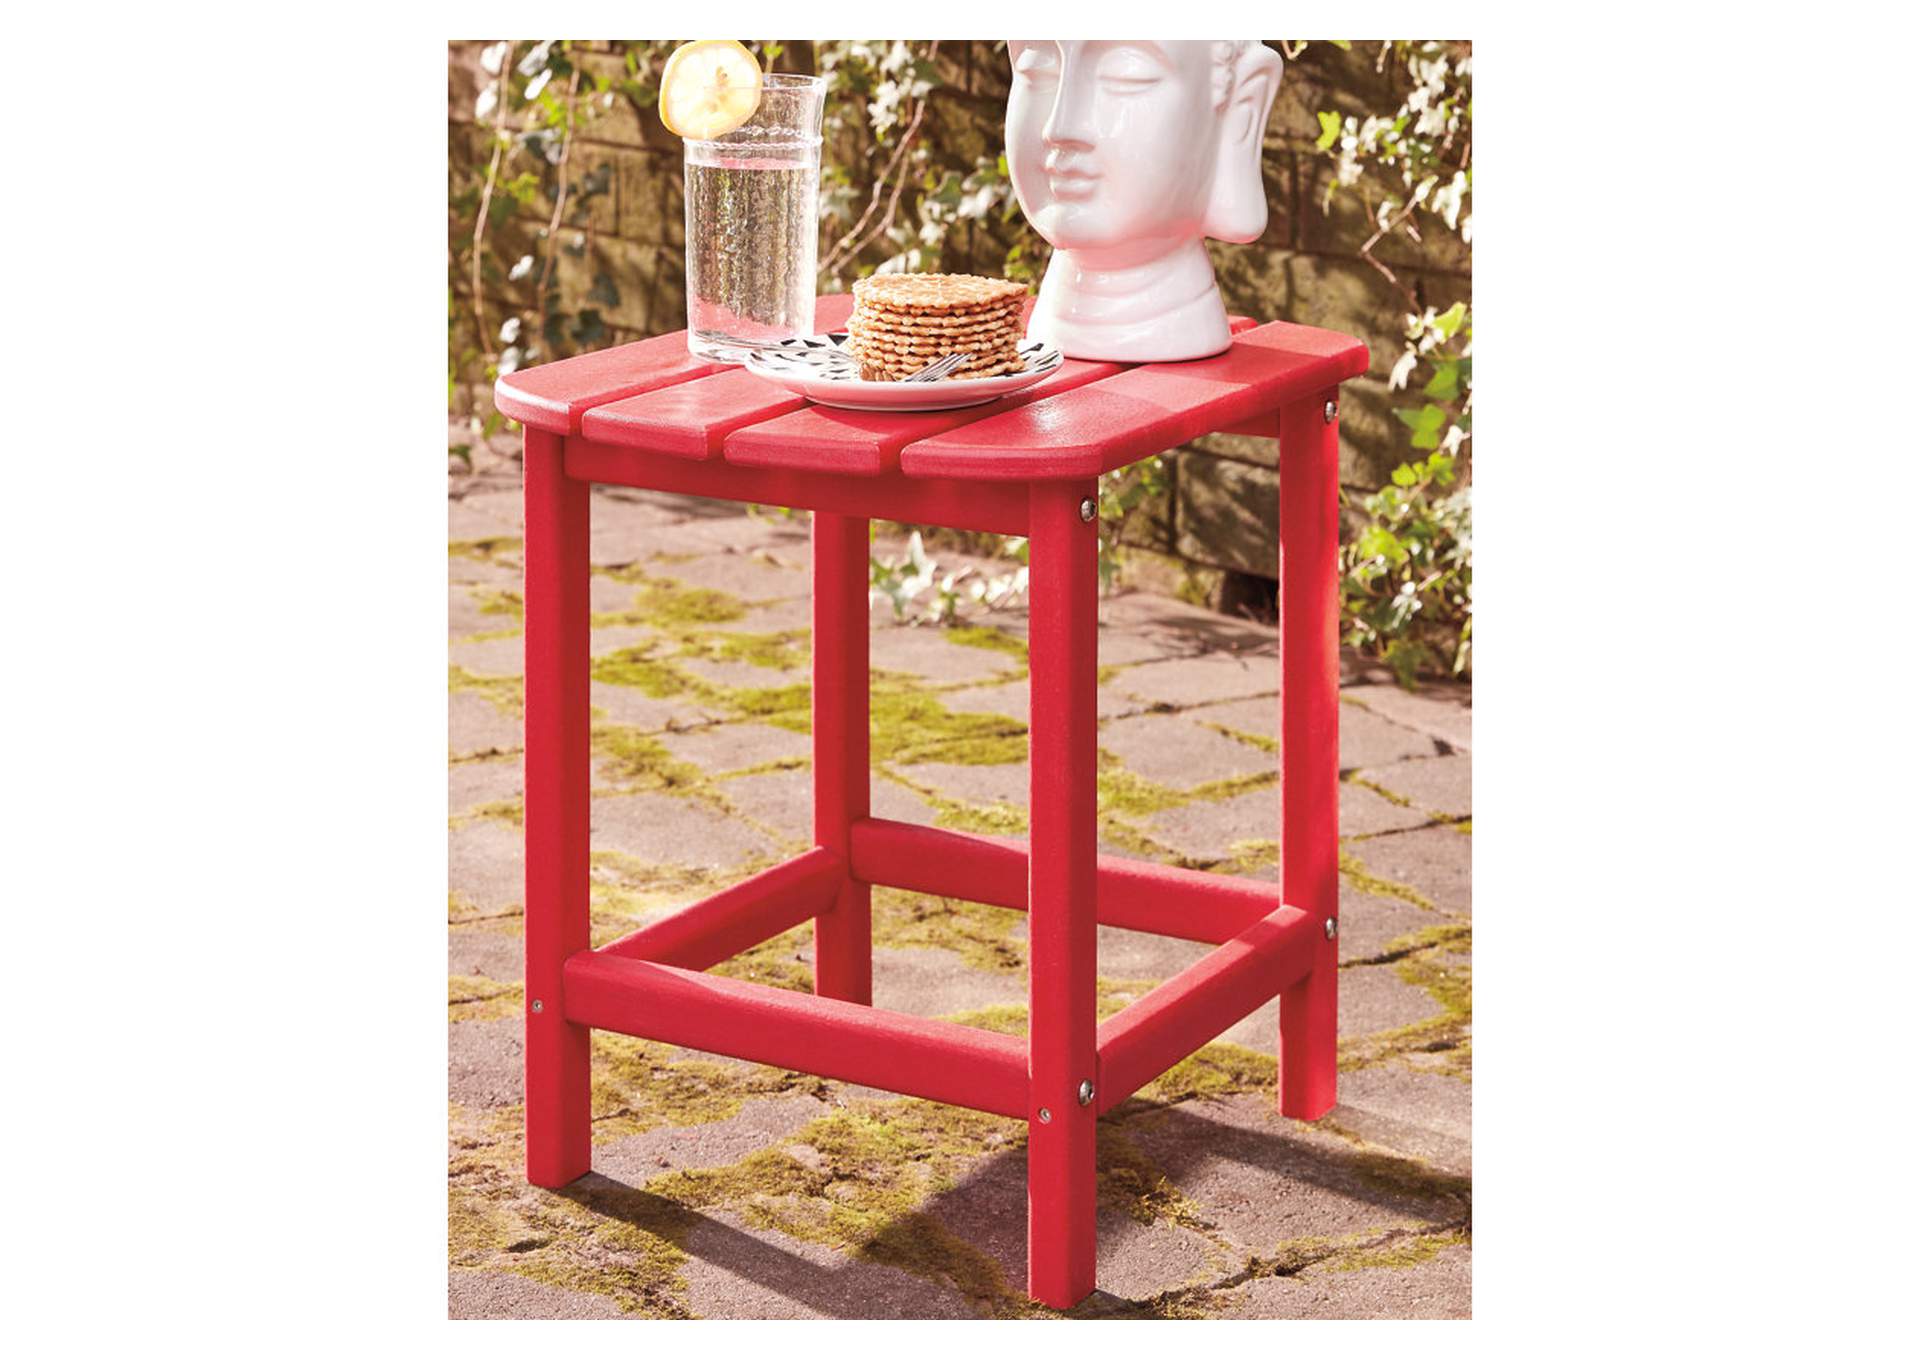 Sundown Treasure 2 Outdoor Chairs with End Table,Outdoor By Ashley